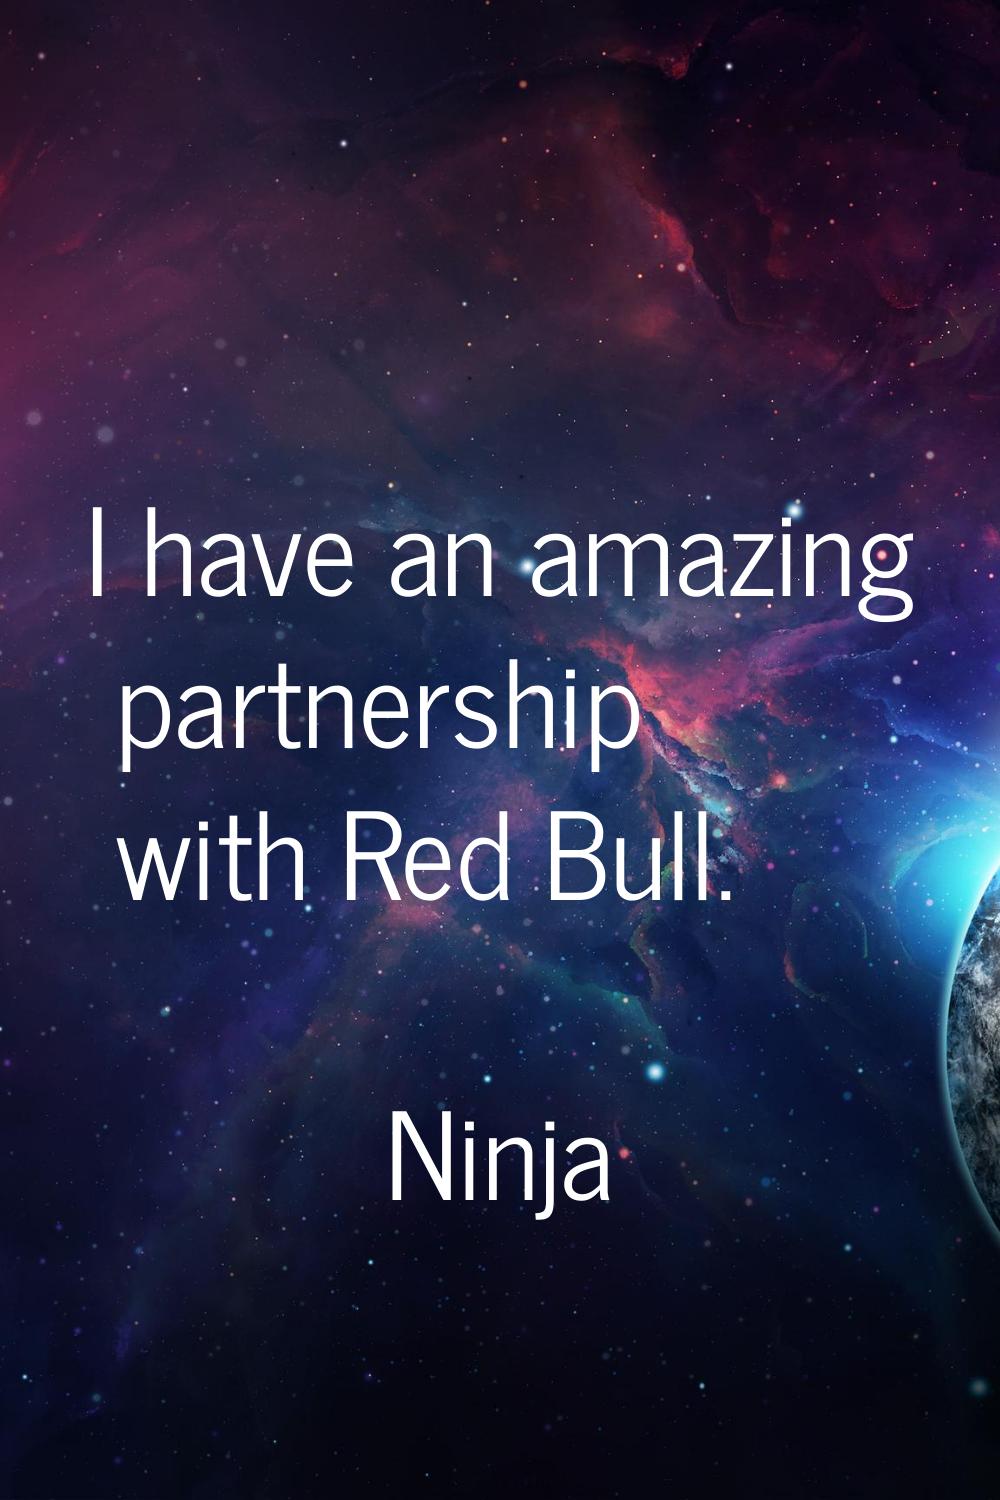 I have an amazing partnership with Red Bull.